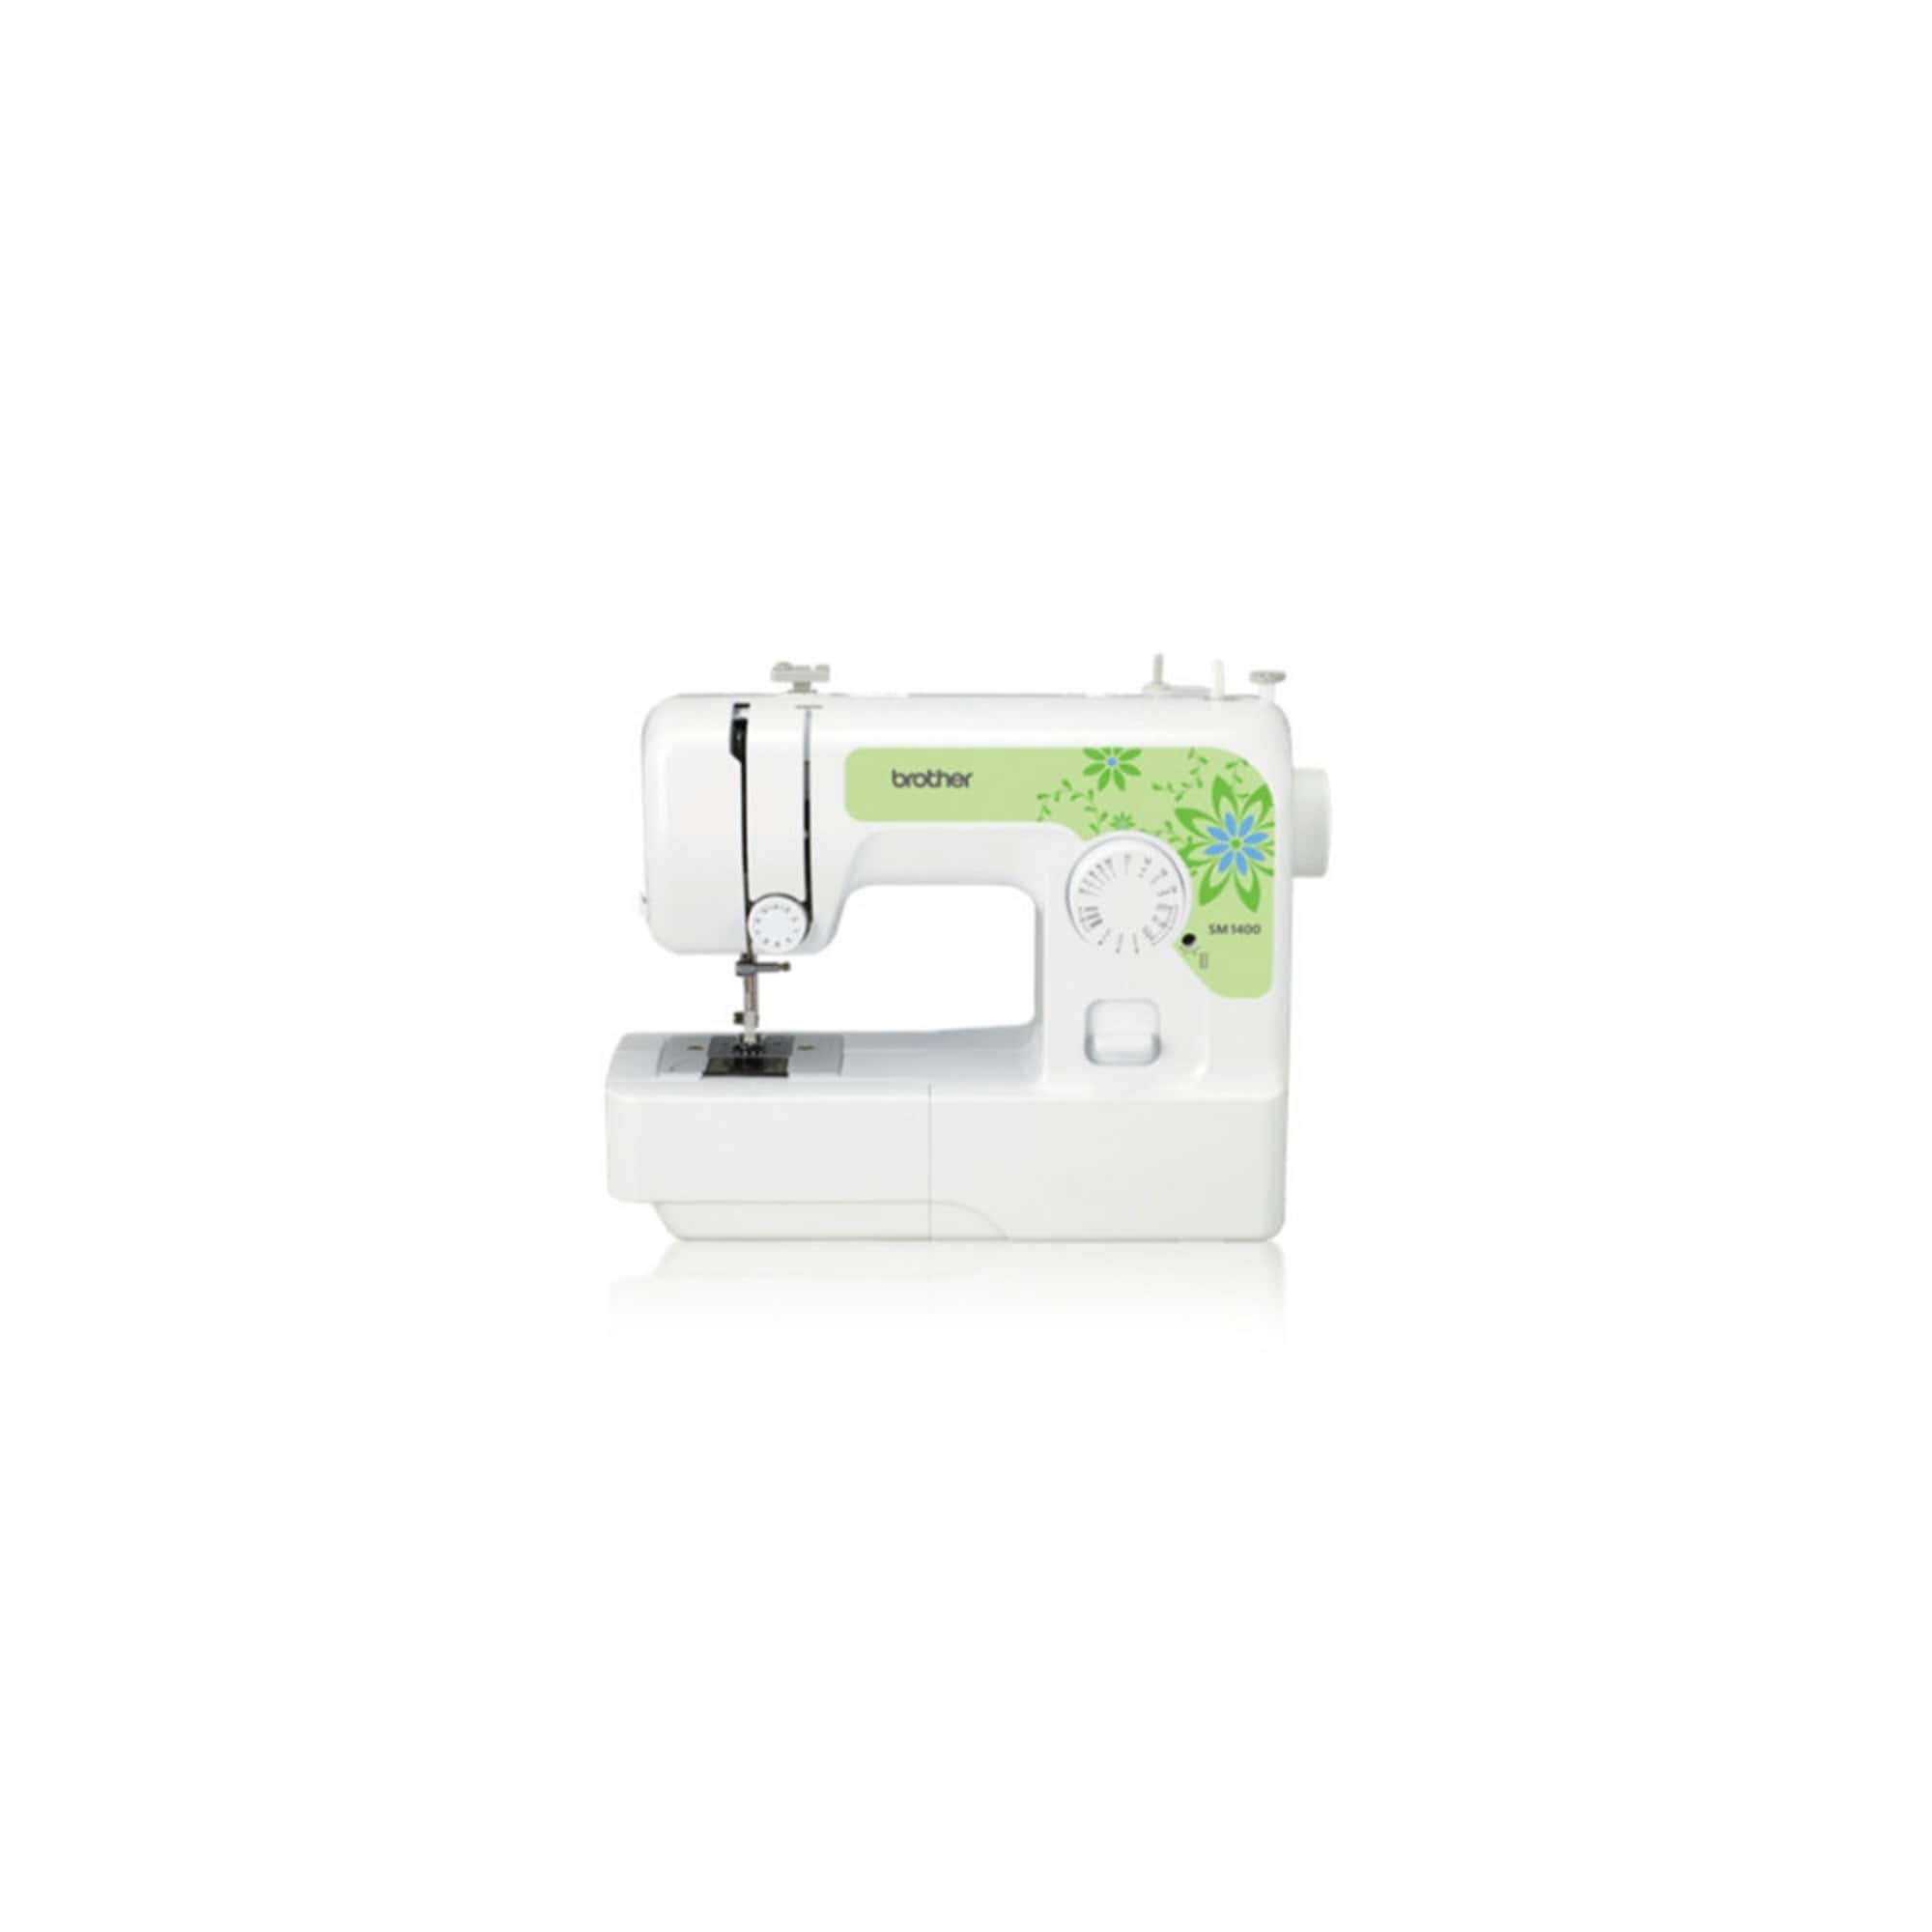 Brother Sewing SM1400 14 Stitch Sewing Machine (White) - Bed Bath & Beyond  - 33152038